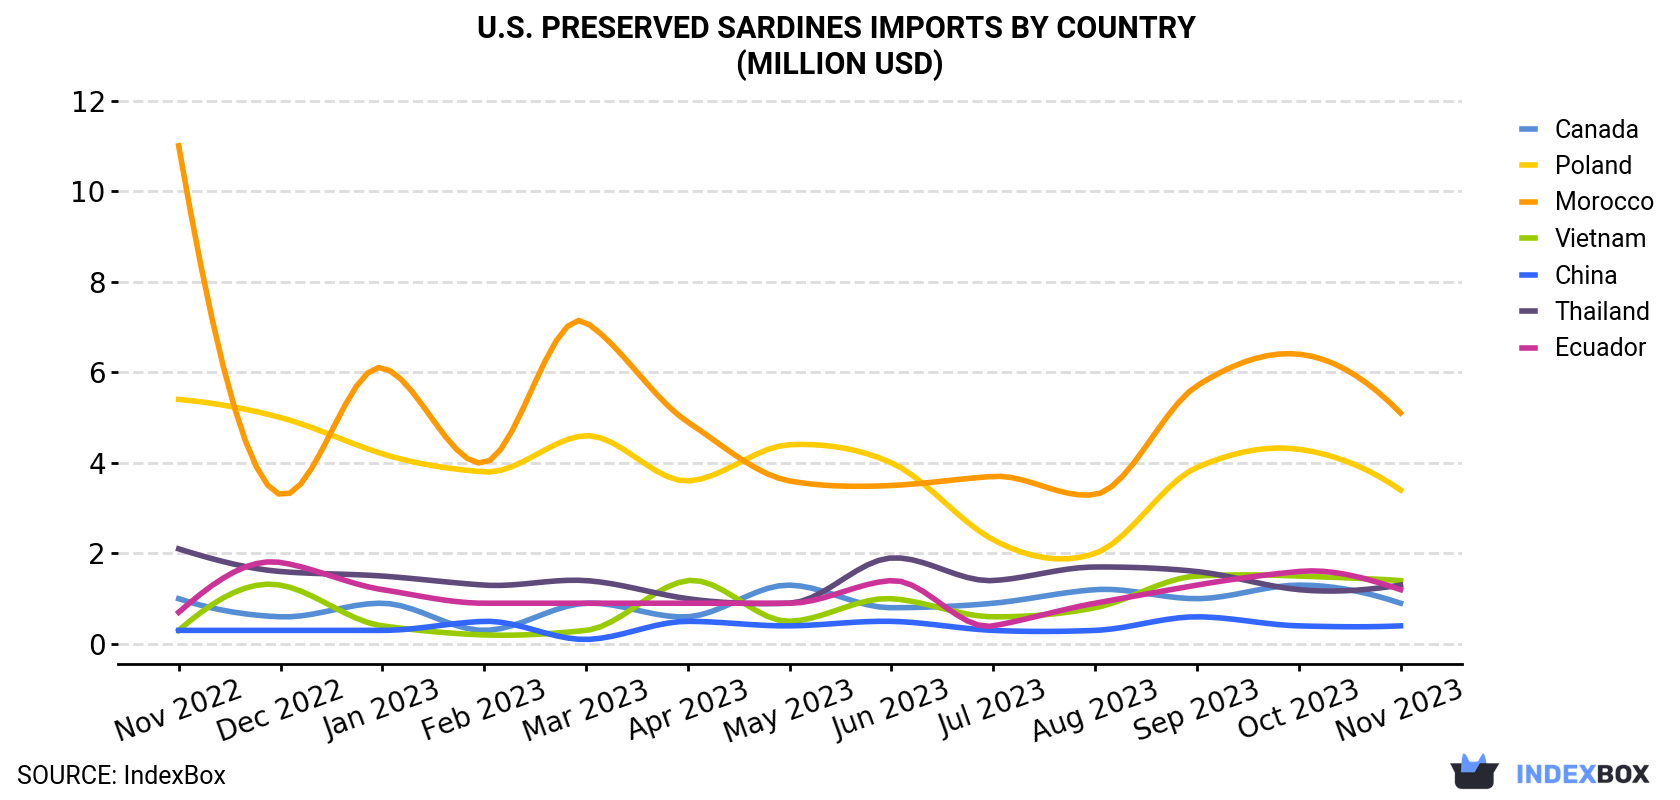 U.S. Preserved Sardines Imports By Country (Million USD)